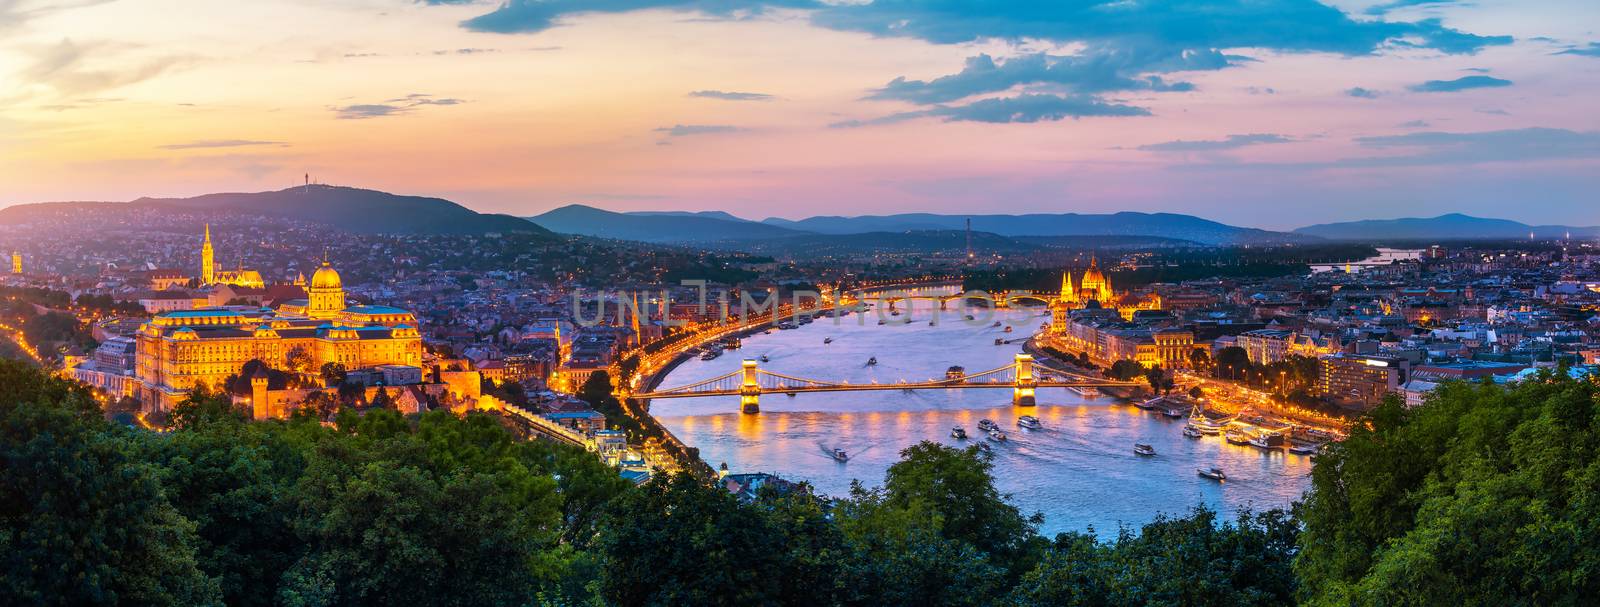 Budapest at sunset by Givaga